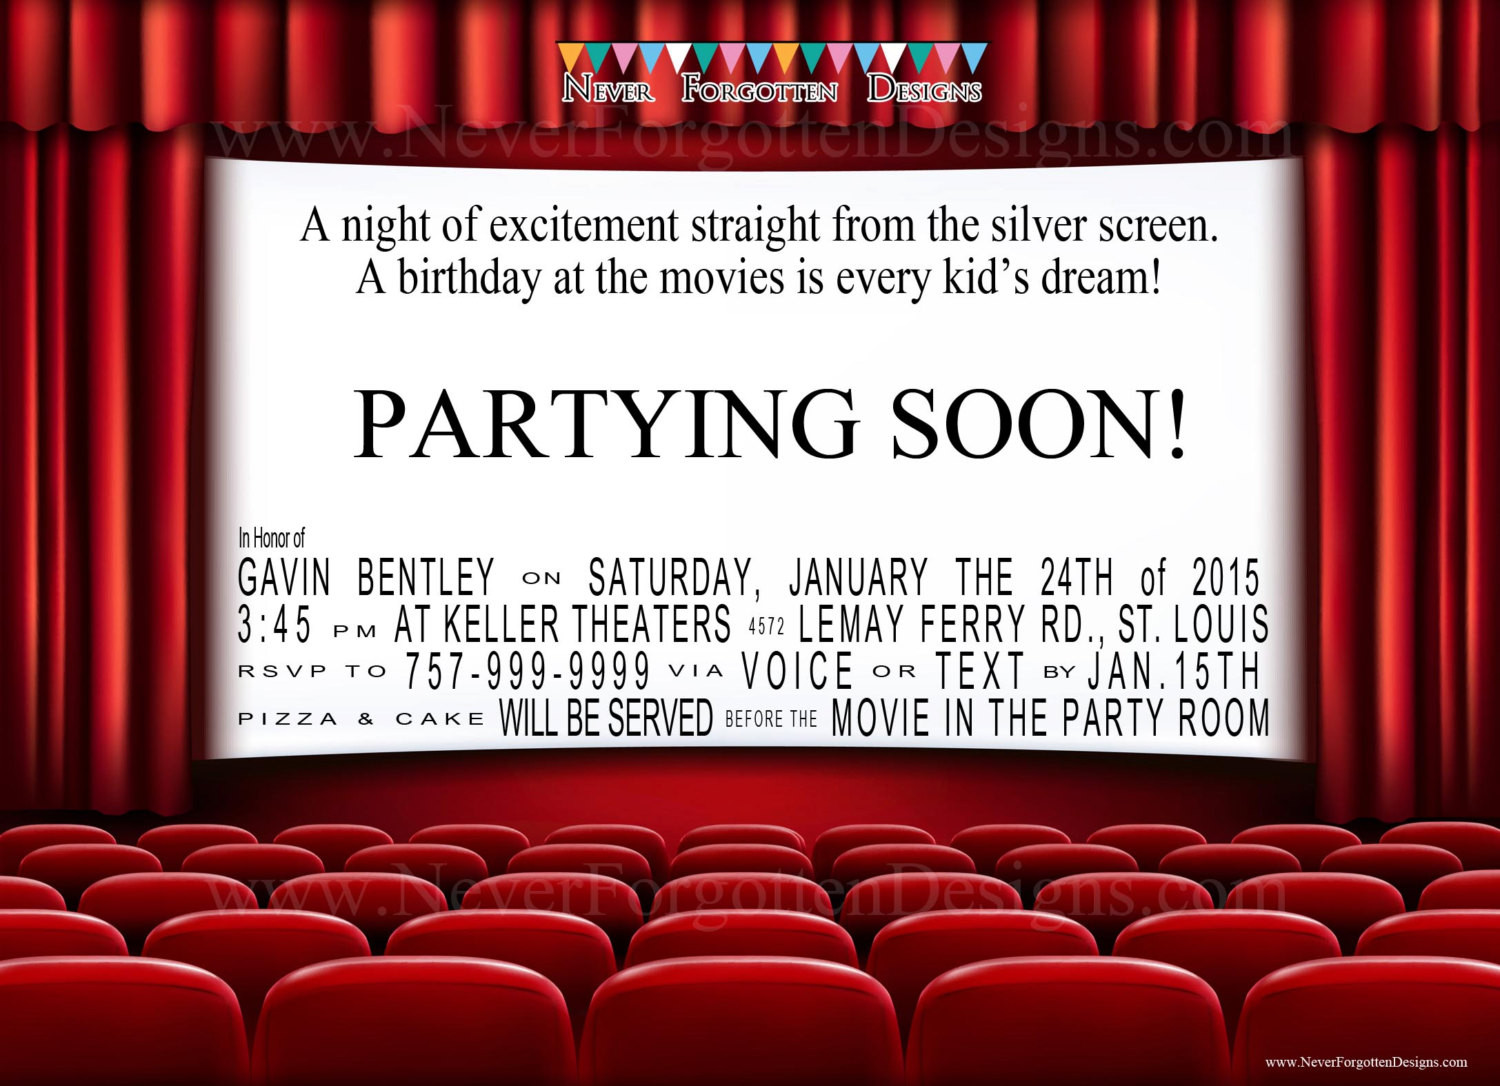 Birthday Party At The Movies
 Movie Theater Birthday Party Invitations for a Night at the